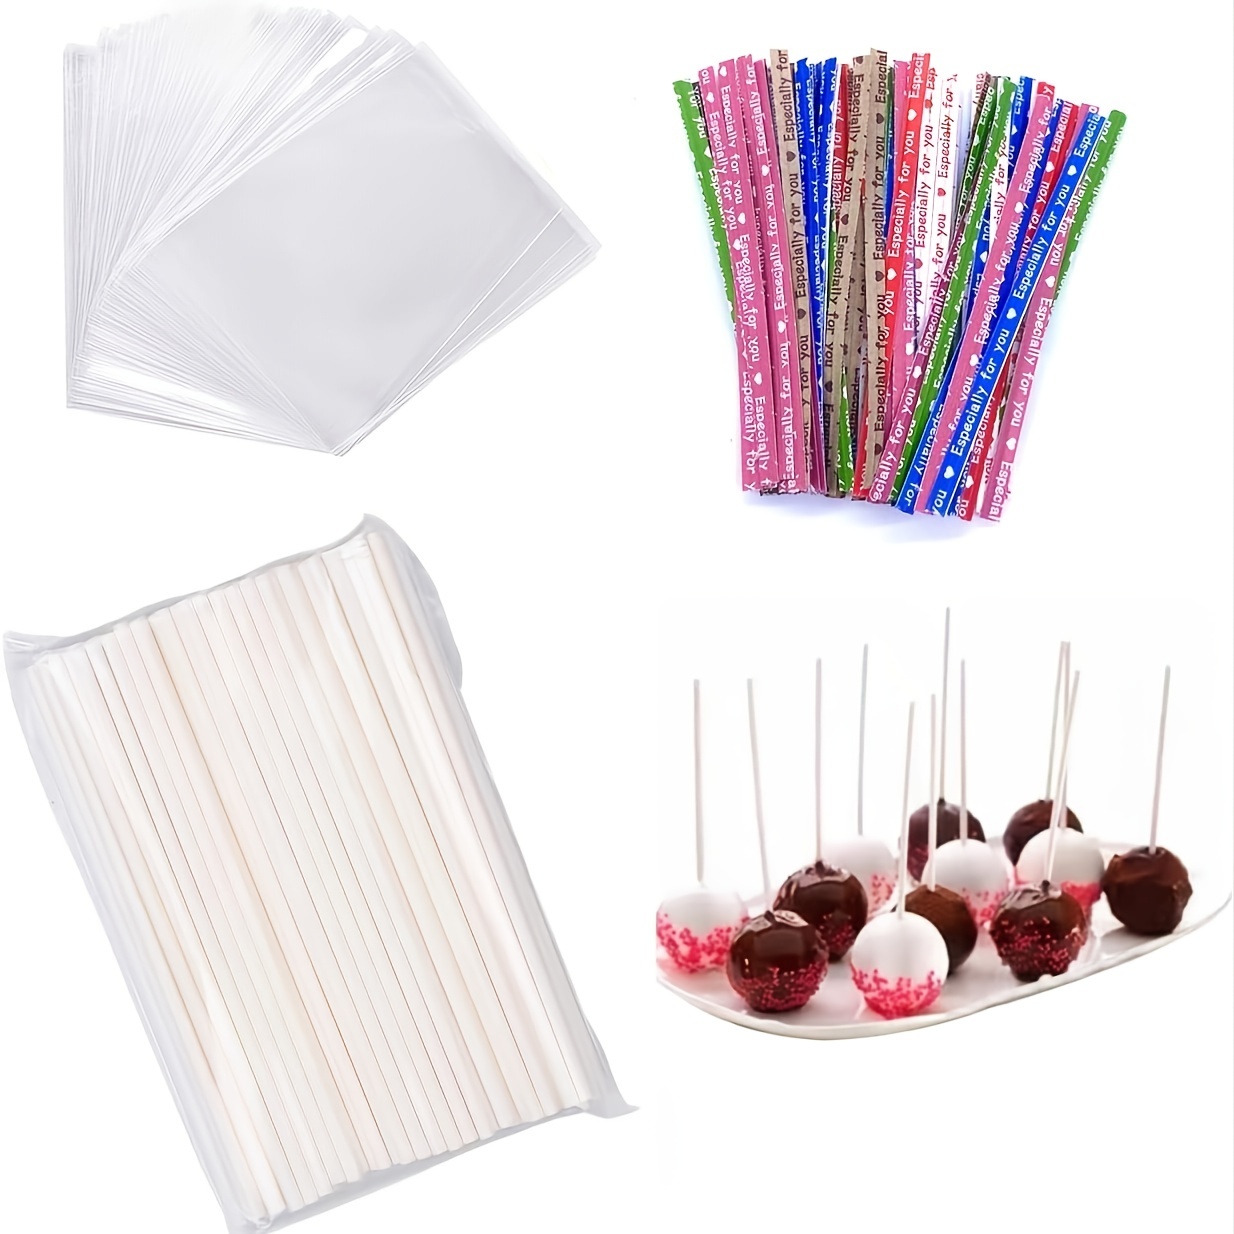 300pcs Cake Pop Kit Including 100ct 6 inch Cake Pop Sticks 100ct Clear Candy Treat Bags Parcel Wedding Party Candy Lollipop 100ct Twist Ties For Cake Pop Lollipop Hard Candy Suckers Chocolate